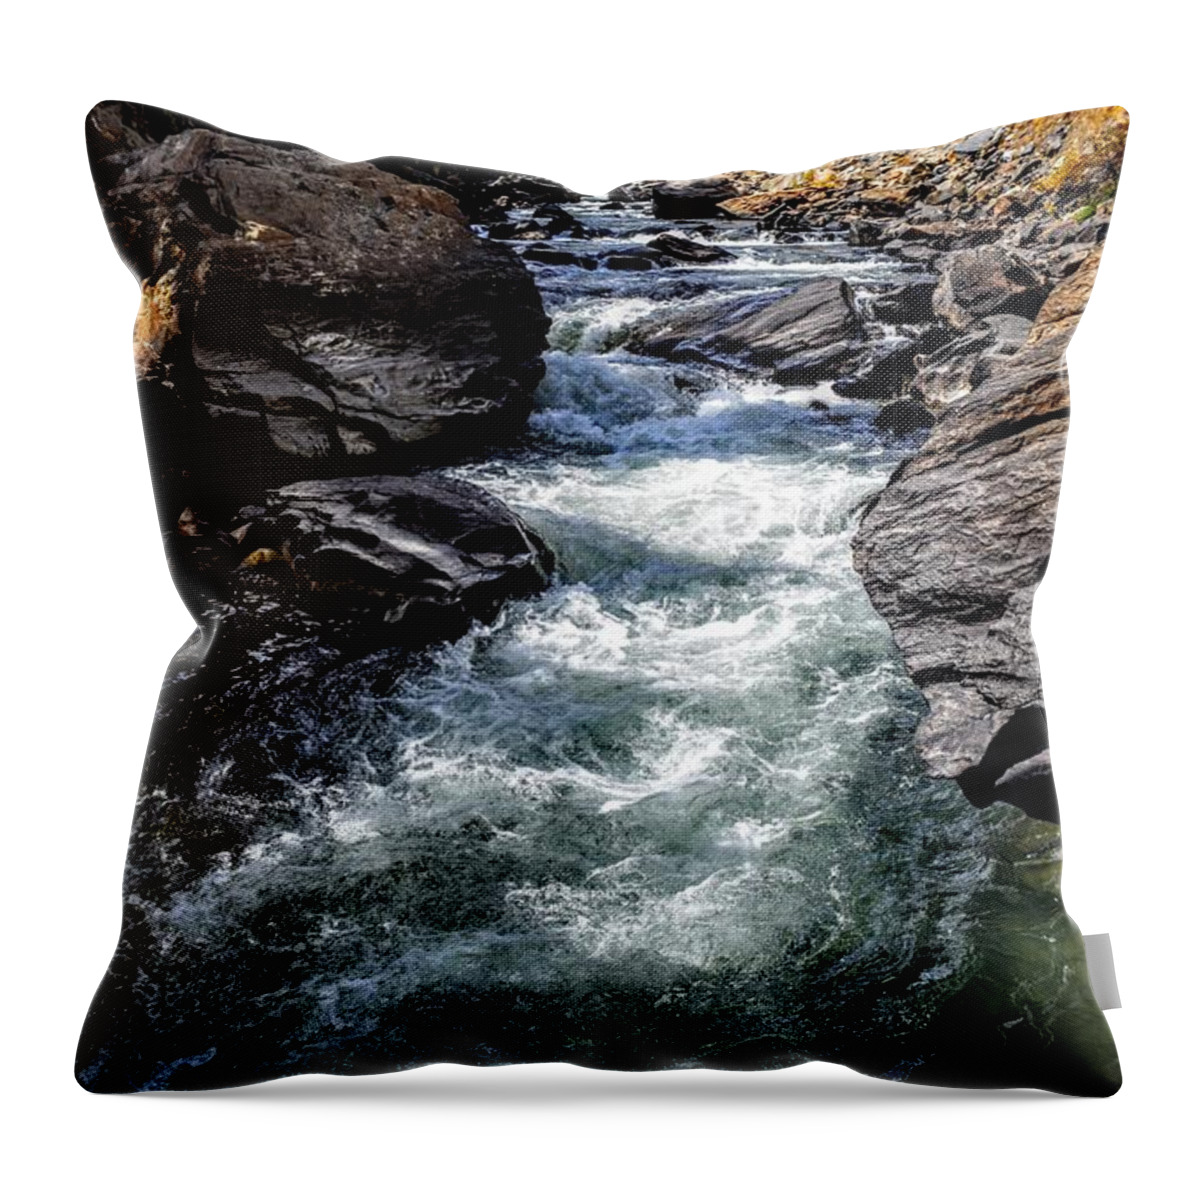 Water Throw Pillow featuring the photograph Striking Solitude by Michael Brungardt